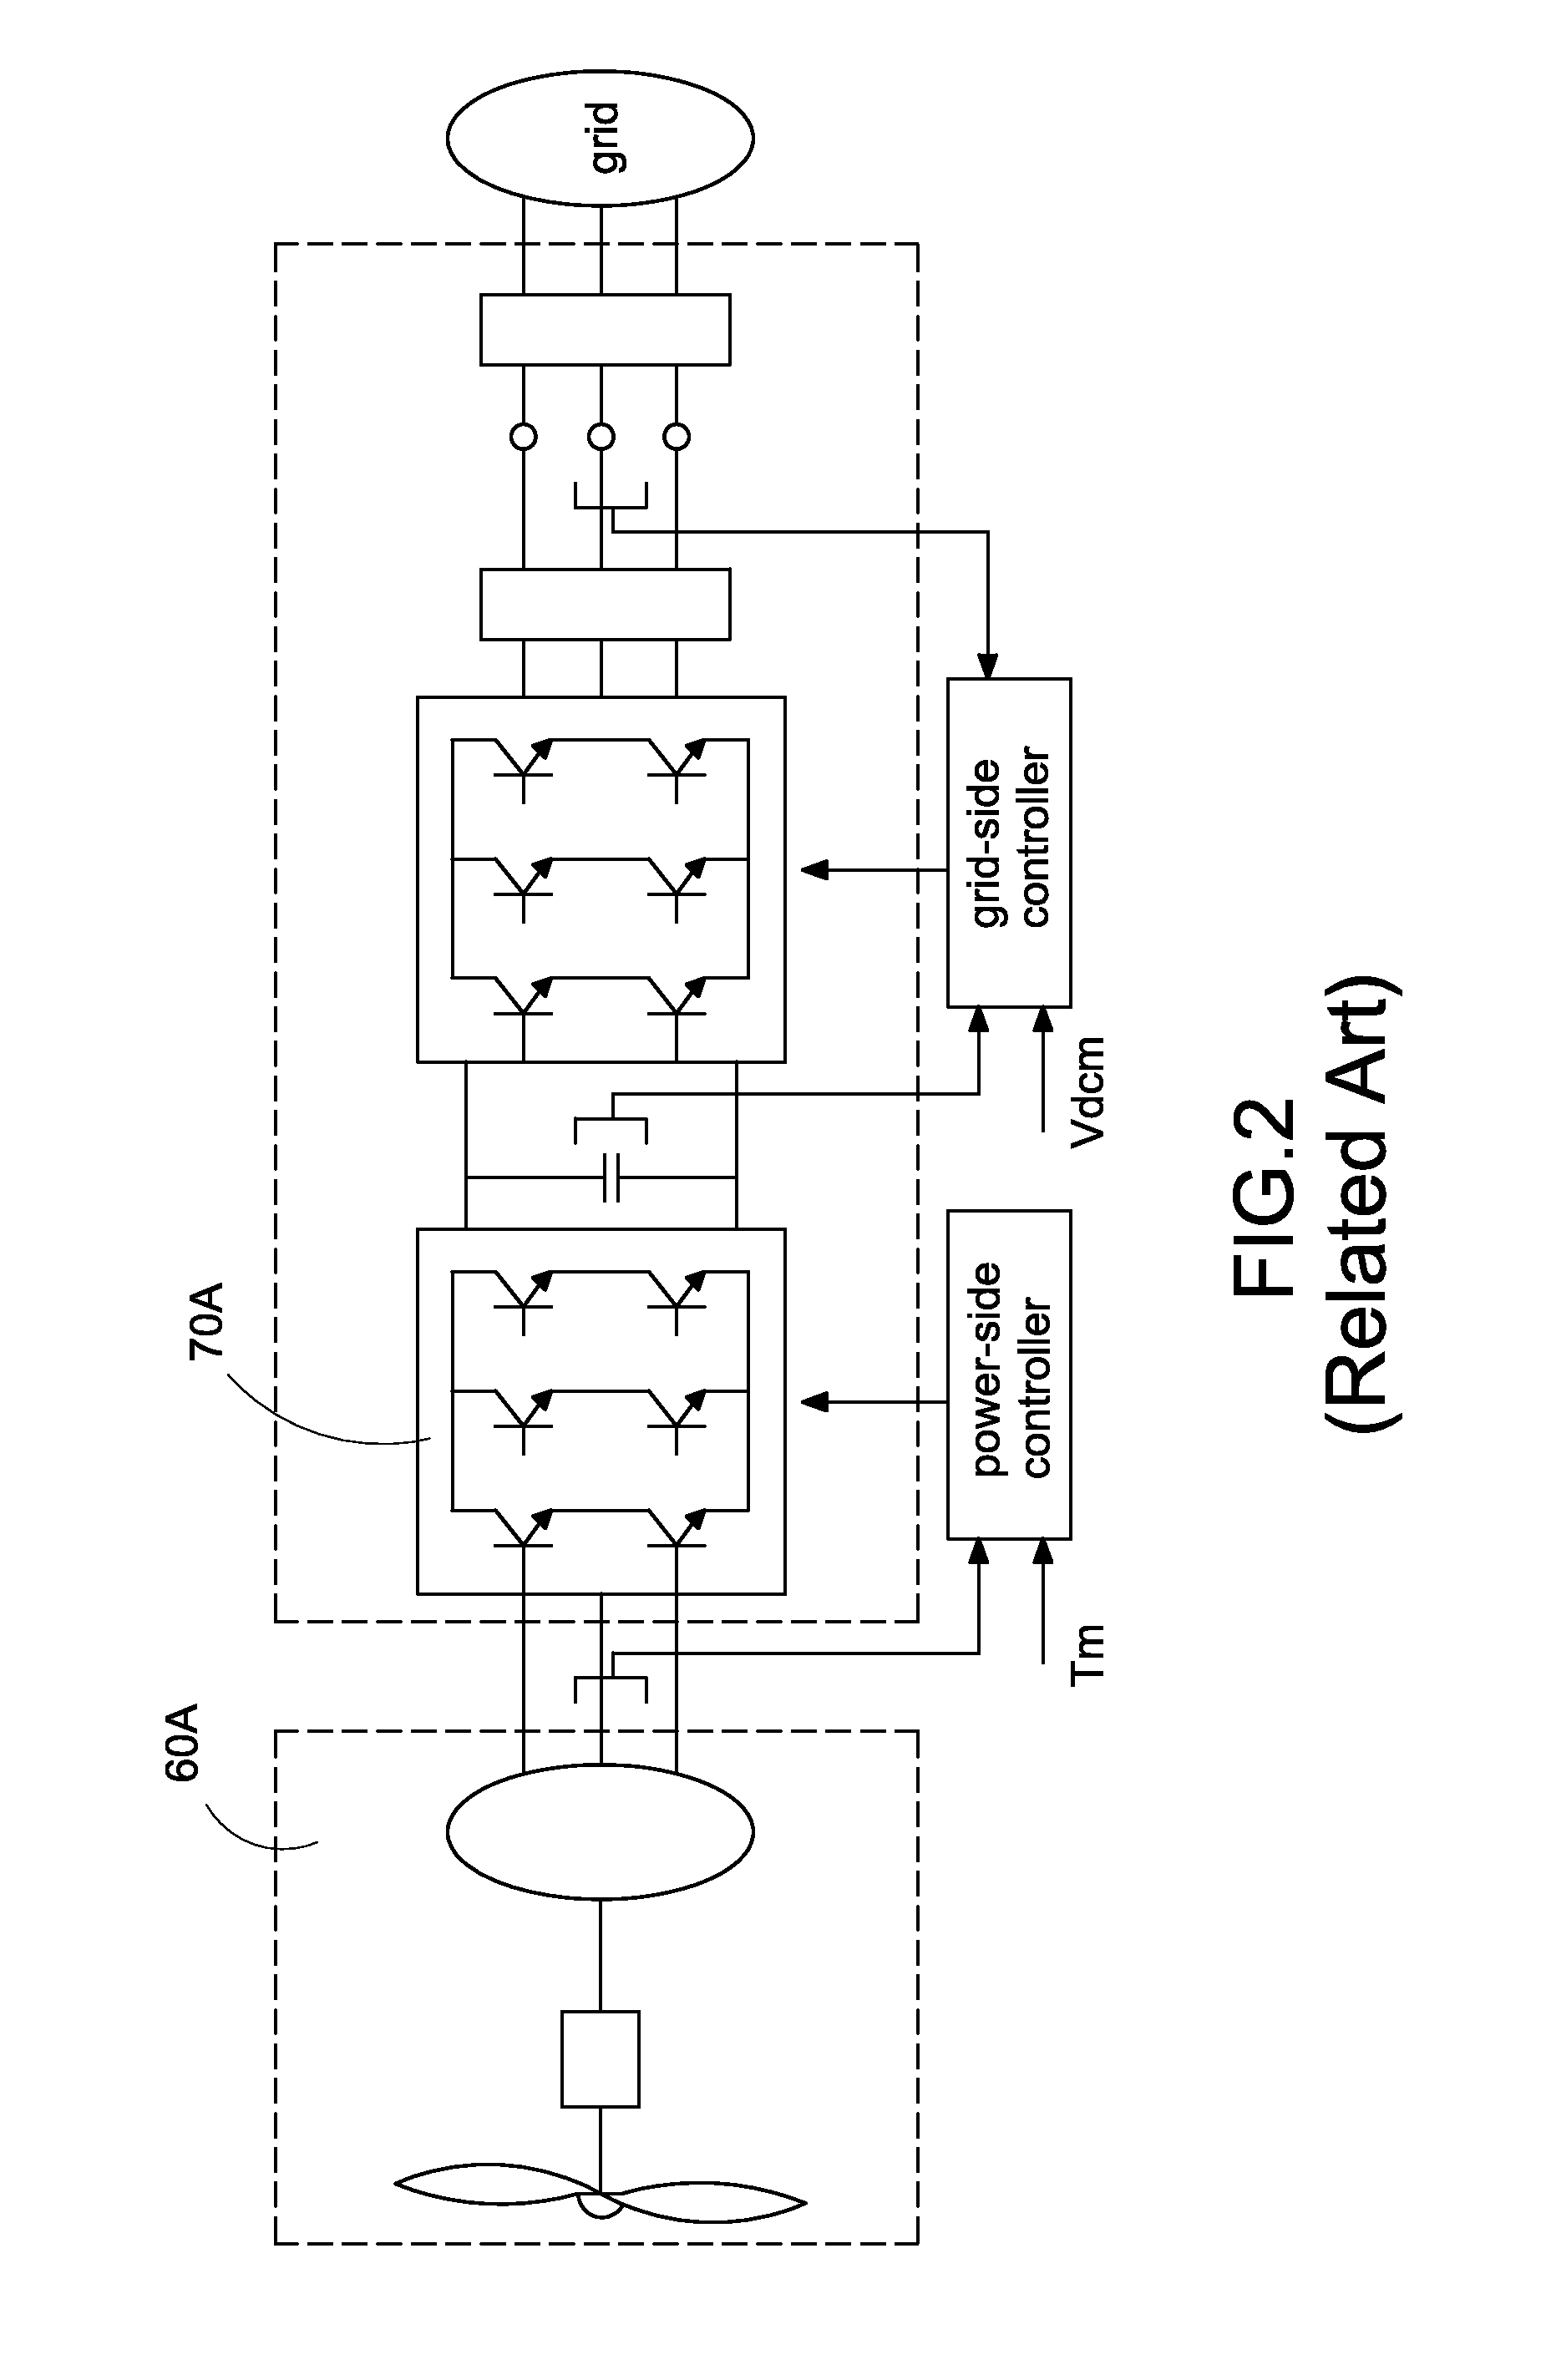 Parallel-connected power conversion system of multi-phase generator and method of operating the same